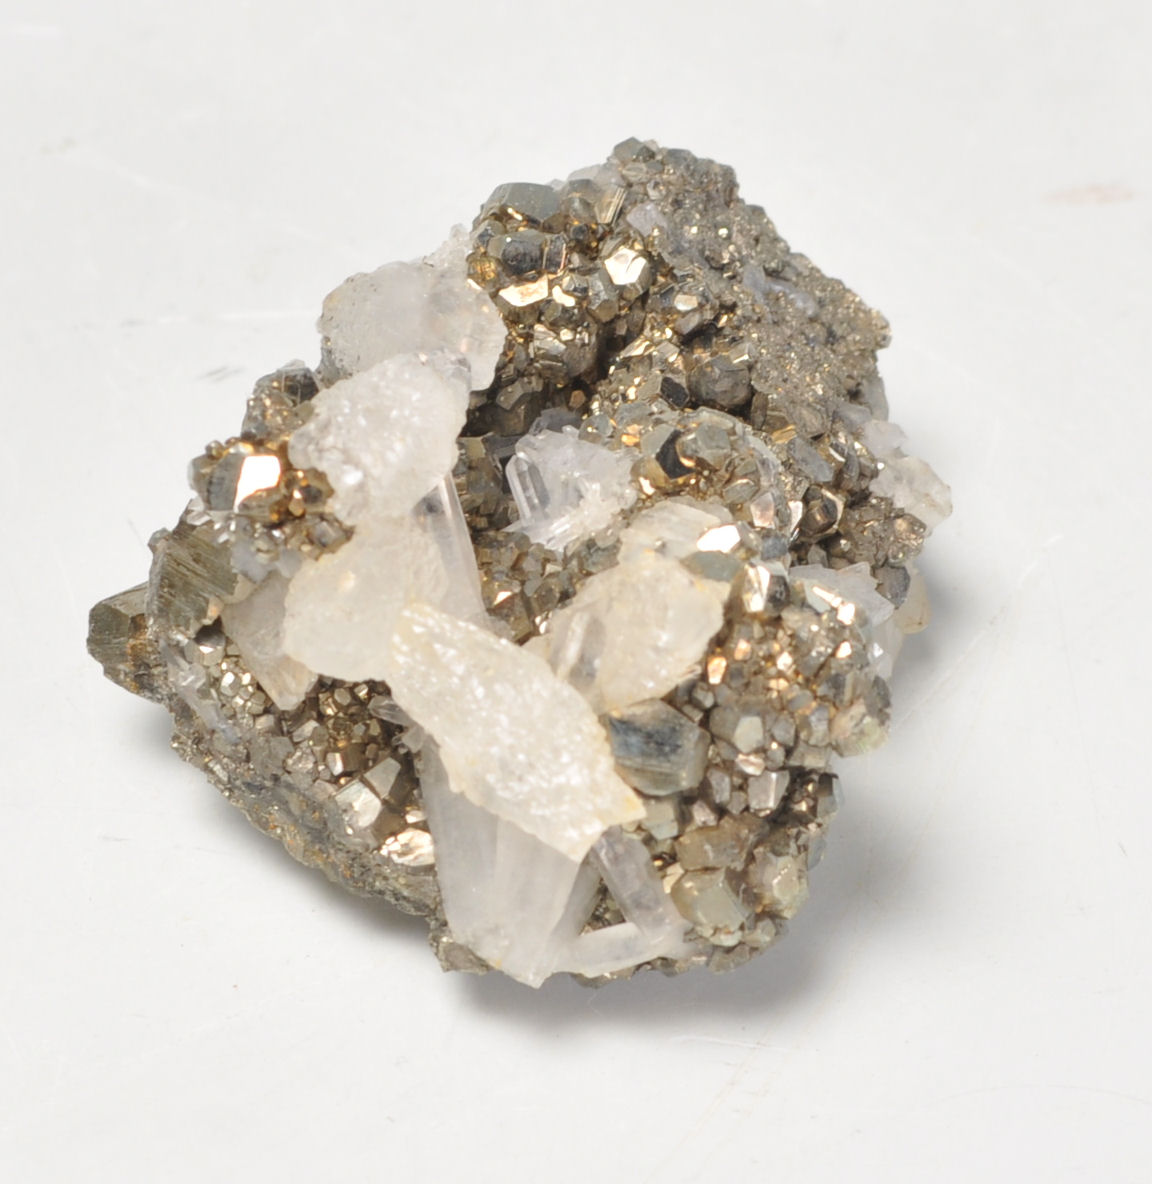 A large collection of pyrite crystal cube clusters / fools gold / rock / fossils / minerals - Image 7 of 8